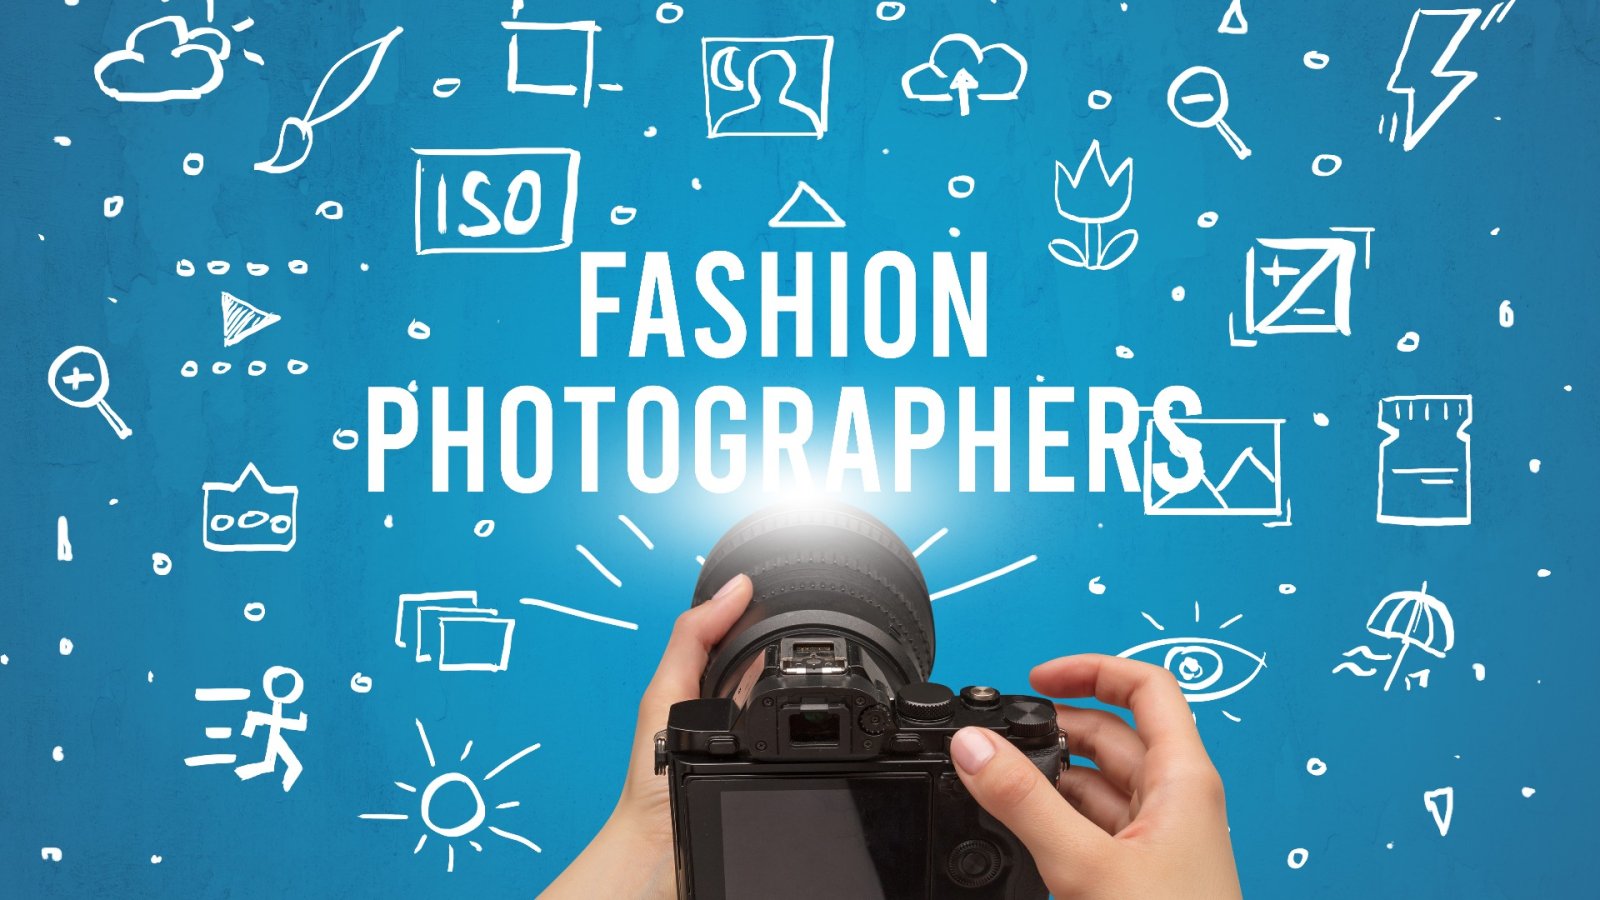 Fashion photographers that you should follow on Instagram